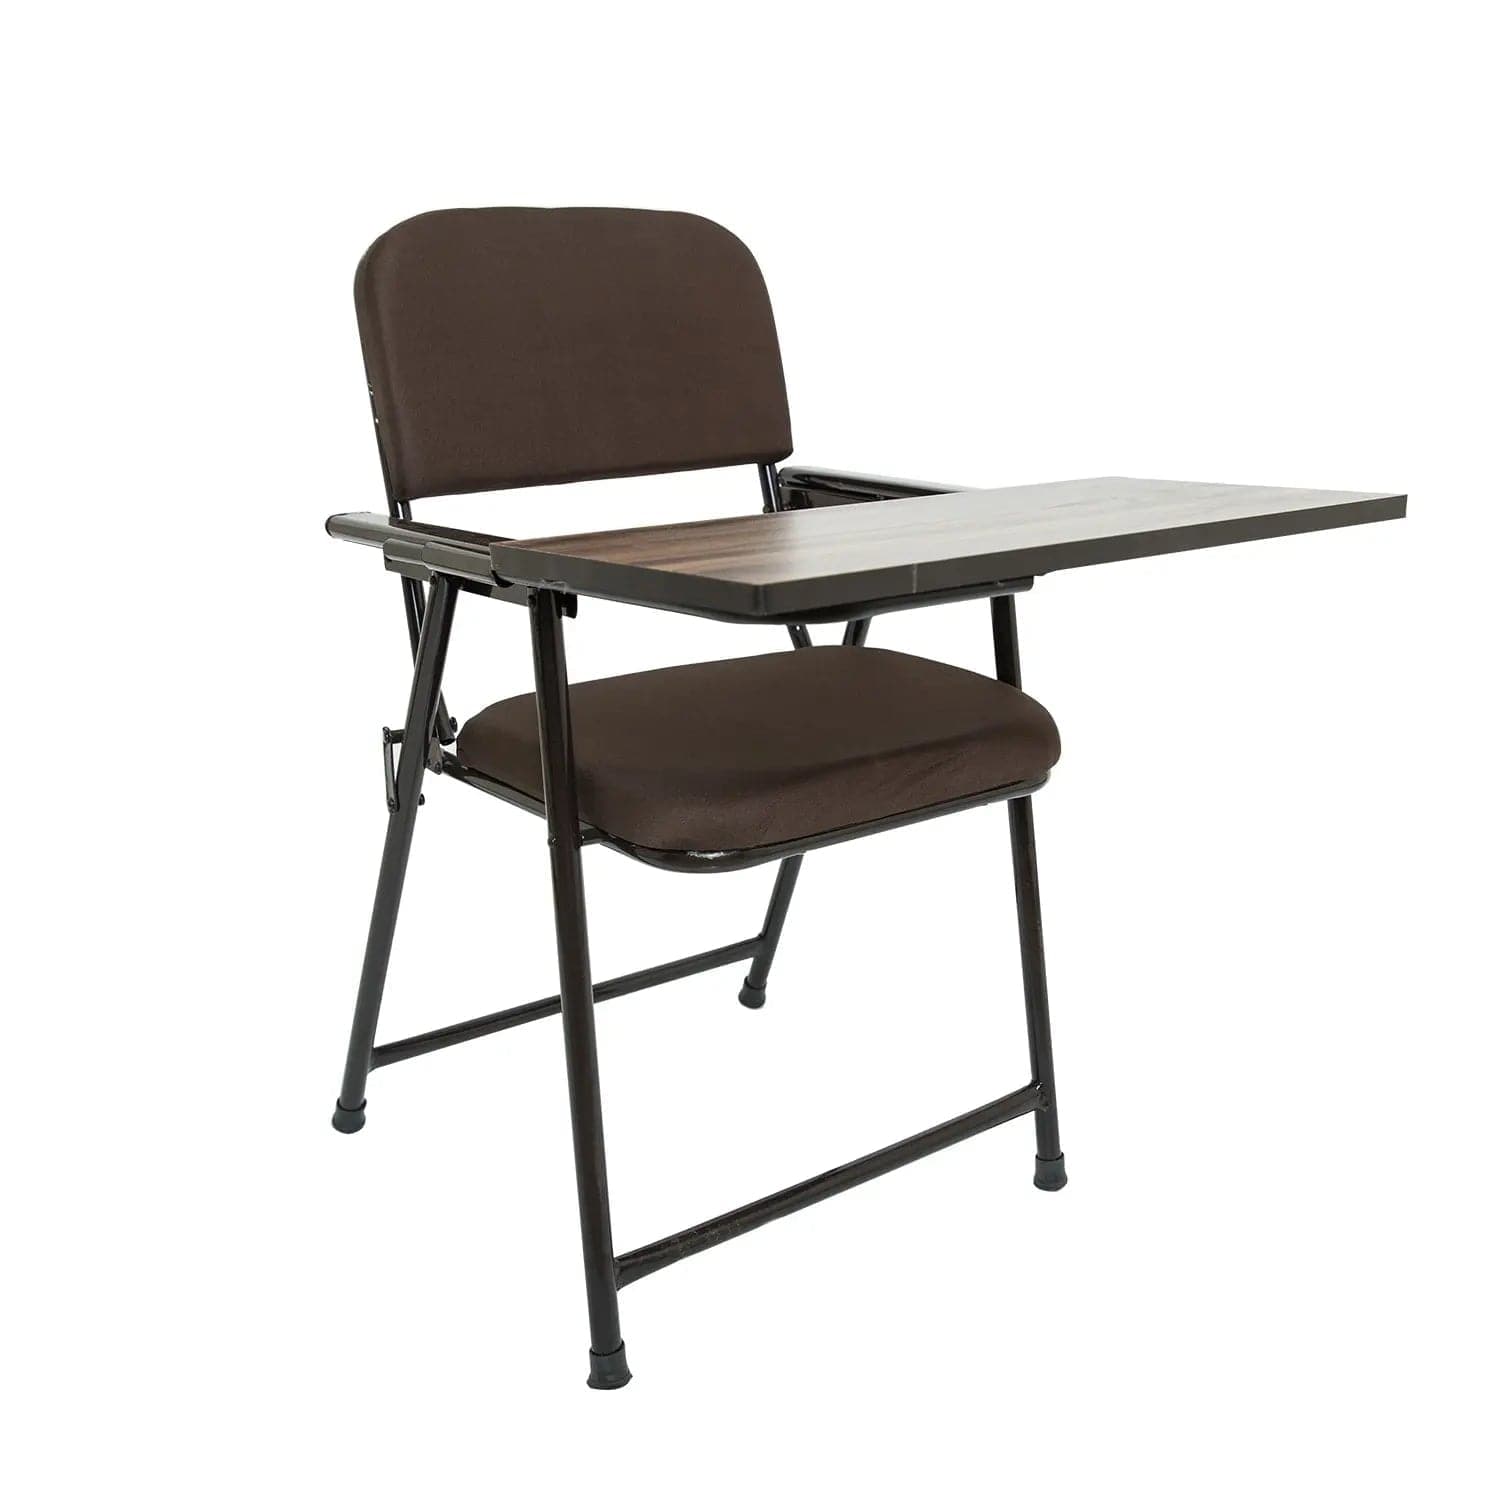 Laika C62 Folding Study Chair with Cushion and Writing Pad CellBell